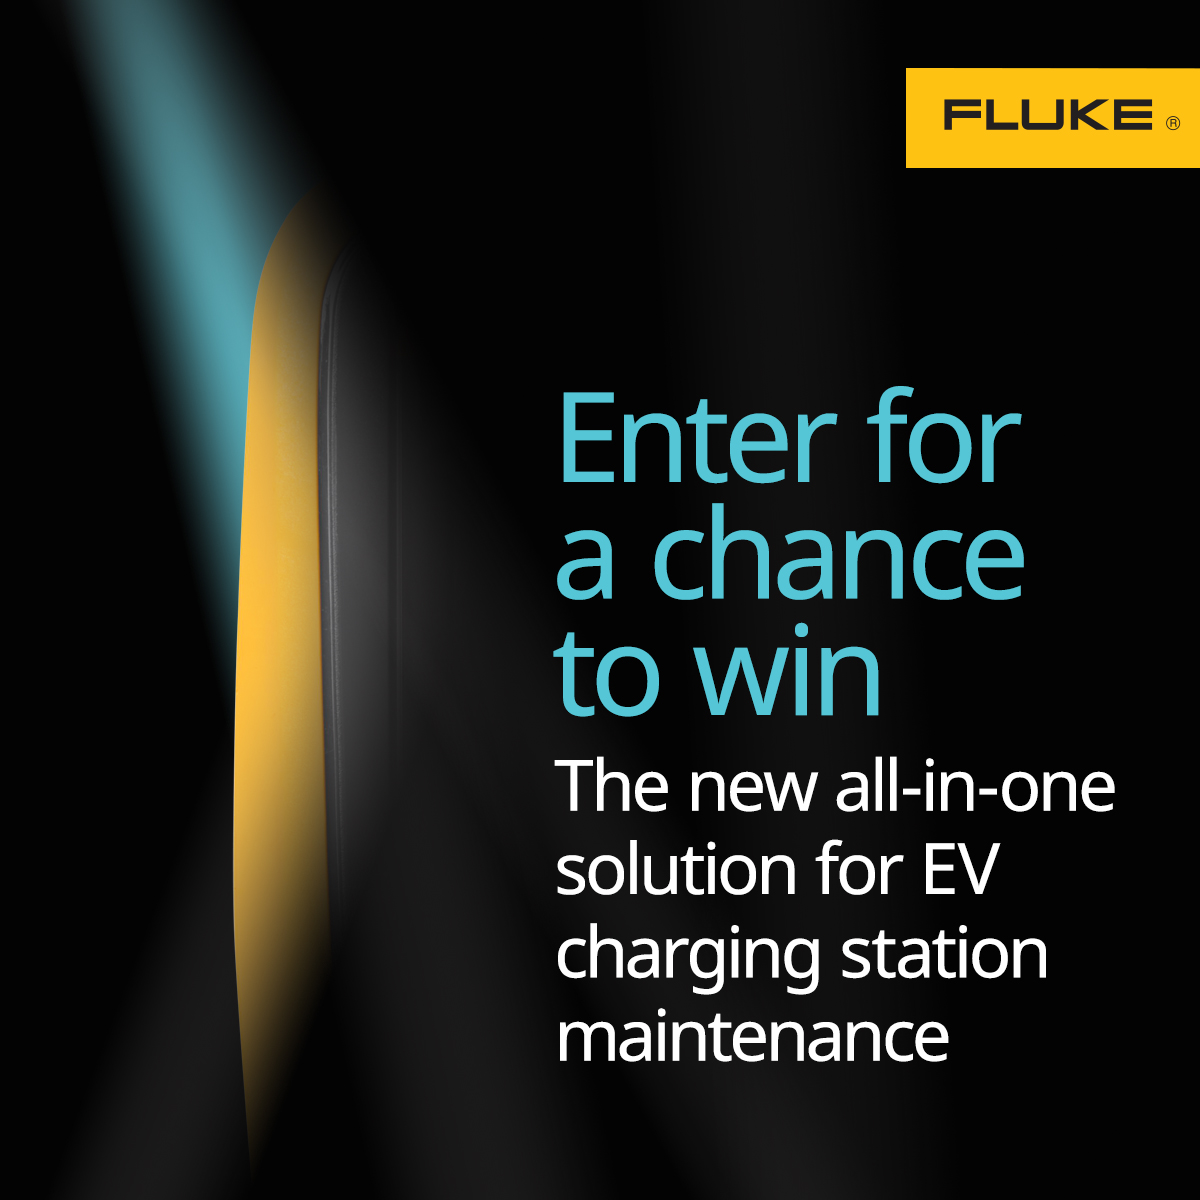 Enter for a chance to win Fluke's new industry leading solar product